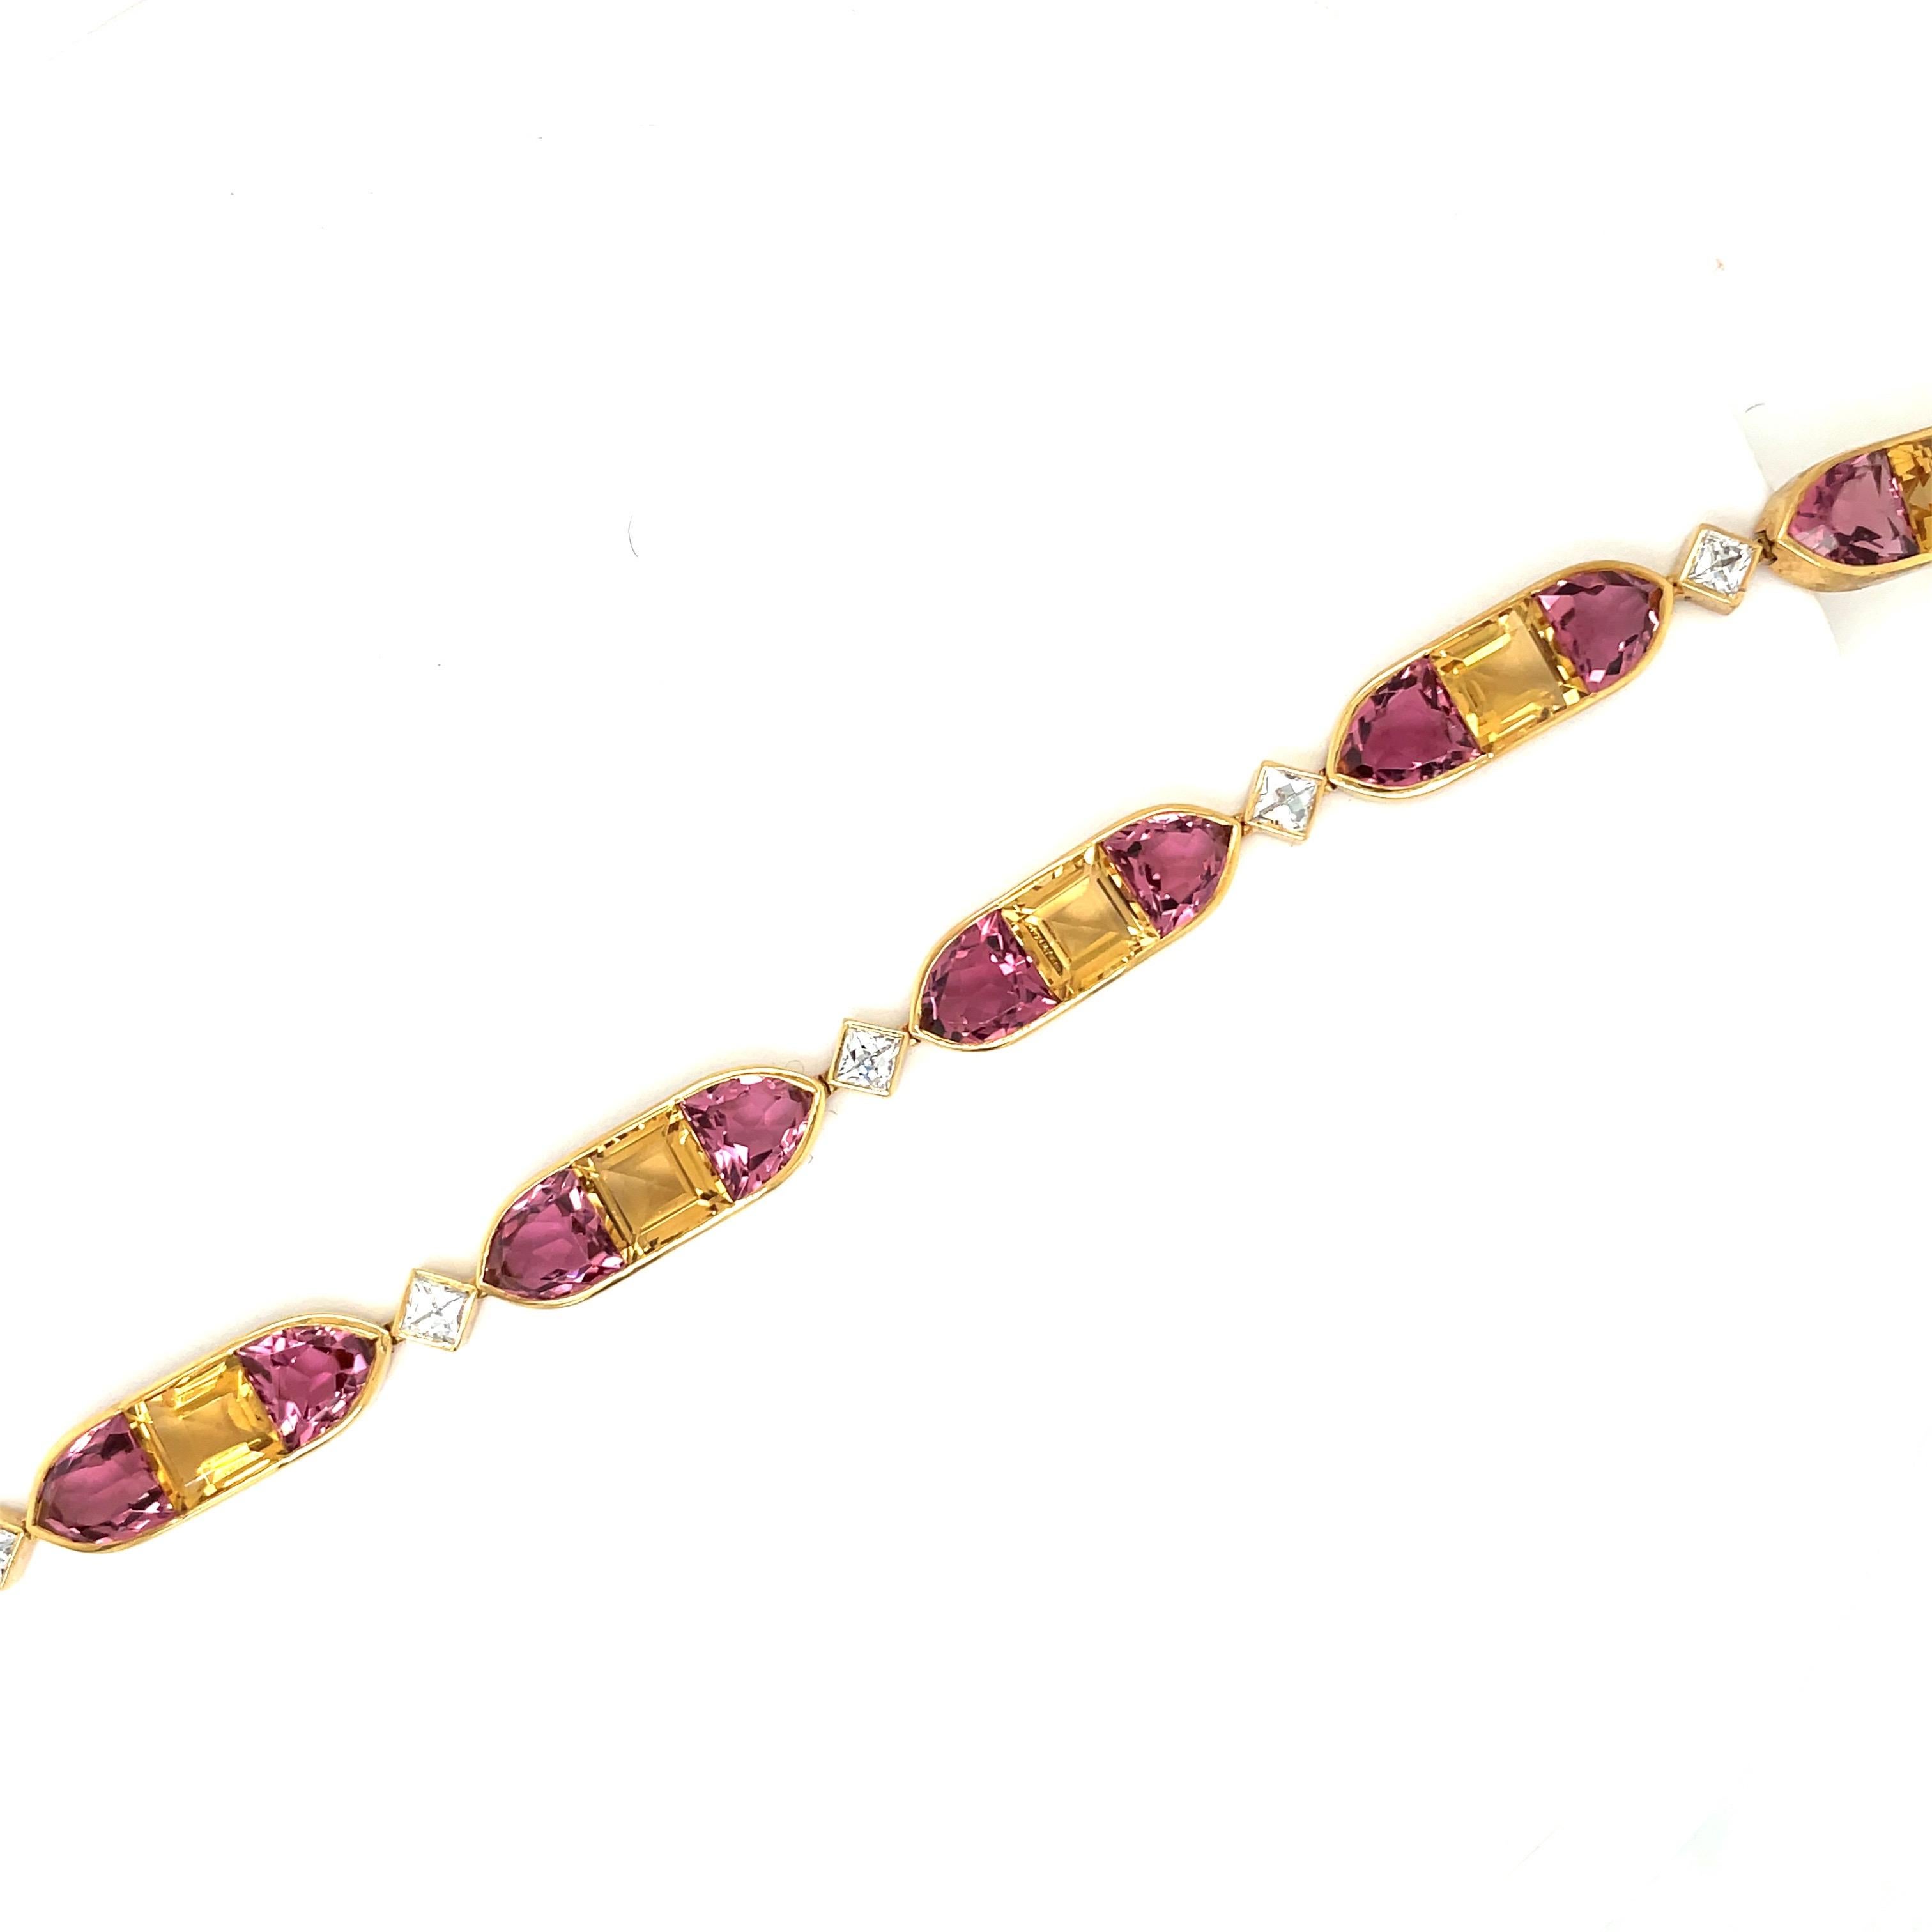 This lovely 18kt gold bracelet is made up of 6 sections featuring a square cut citrine flanked by pink tourmalines. Each section is connected with a beautiful white french cut diamond.
Totaling 42cts of tourmaline and 2.40 cts of diamonds.
The